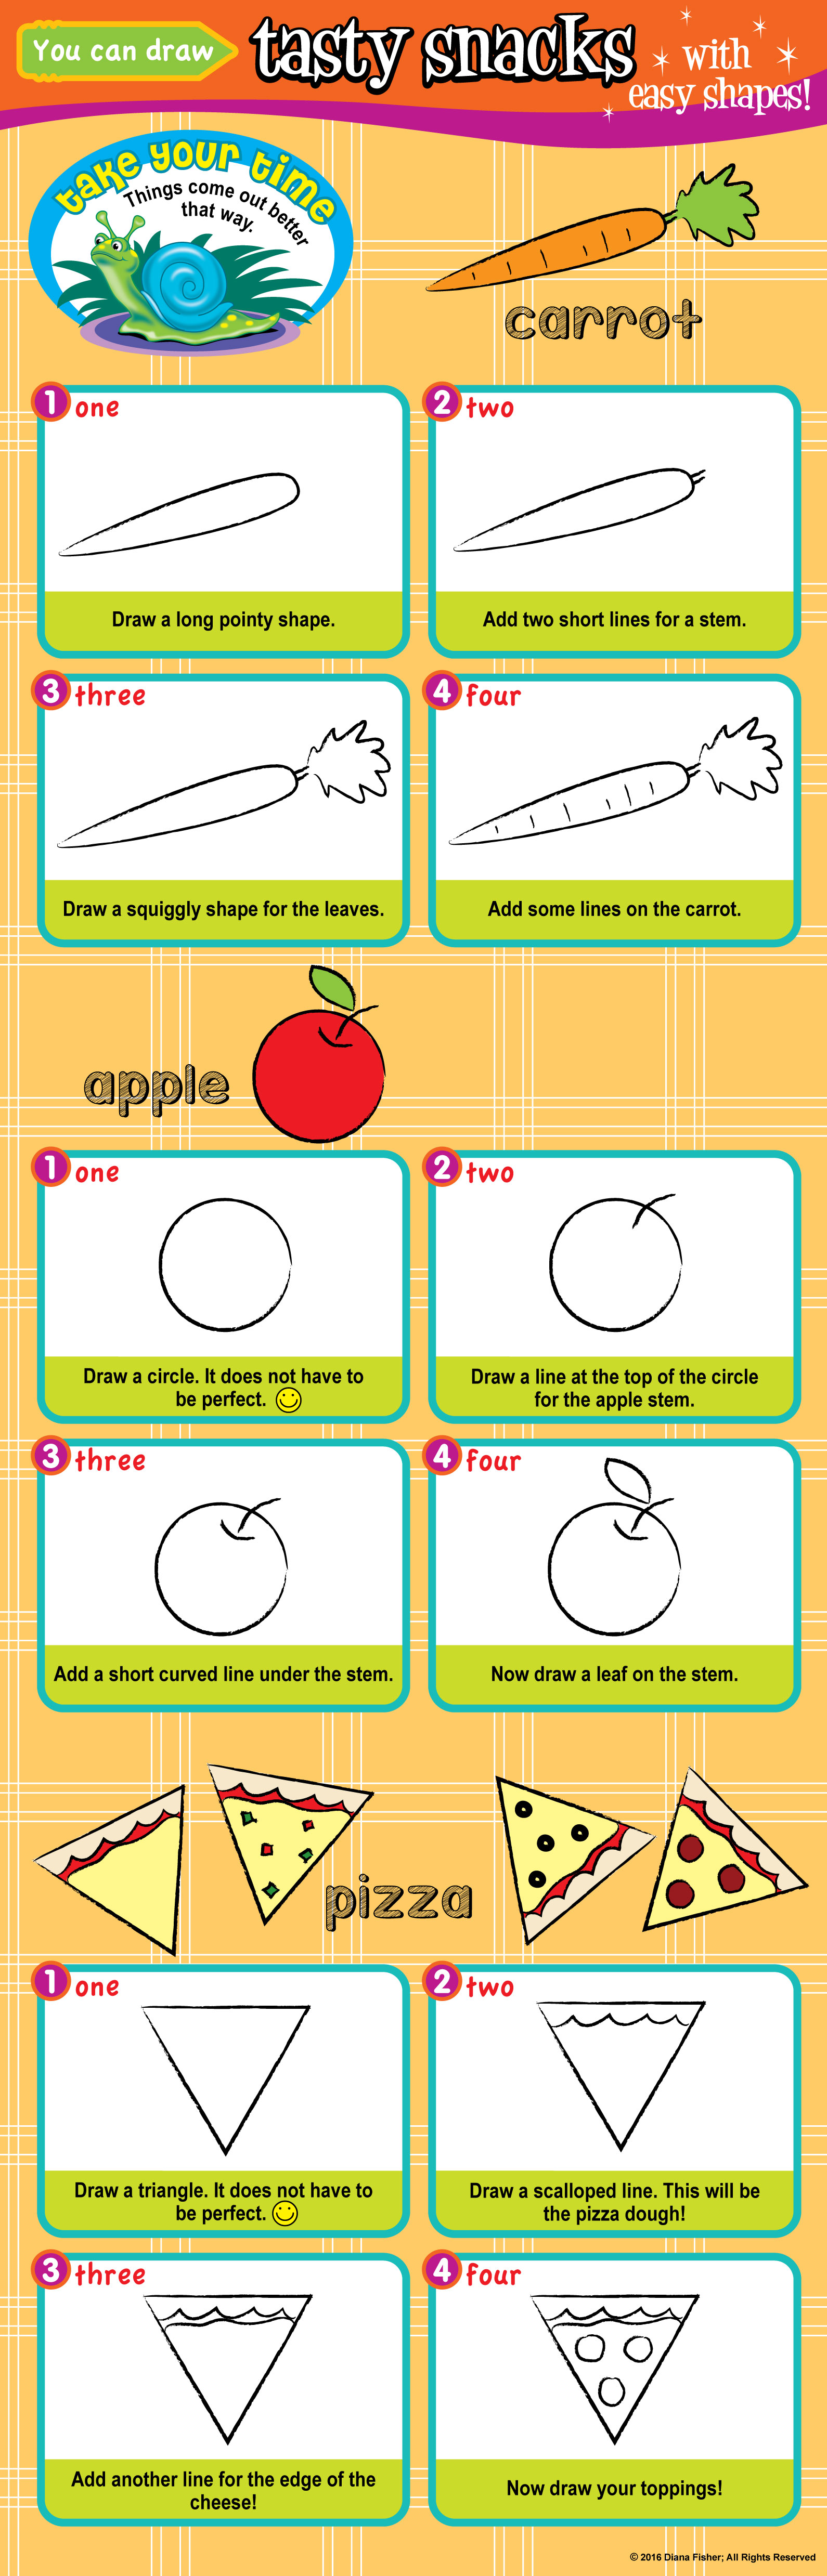 easy to draw a carrot, and apple, and pizza for children